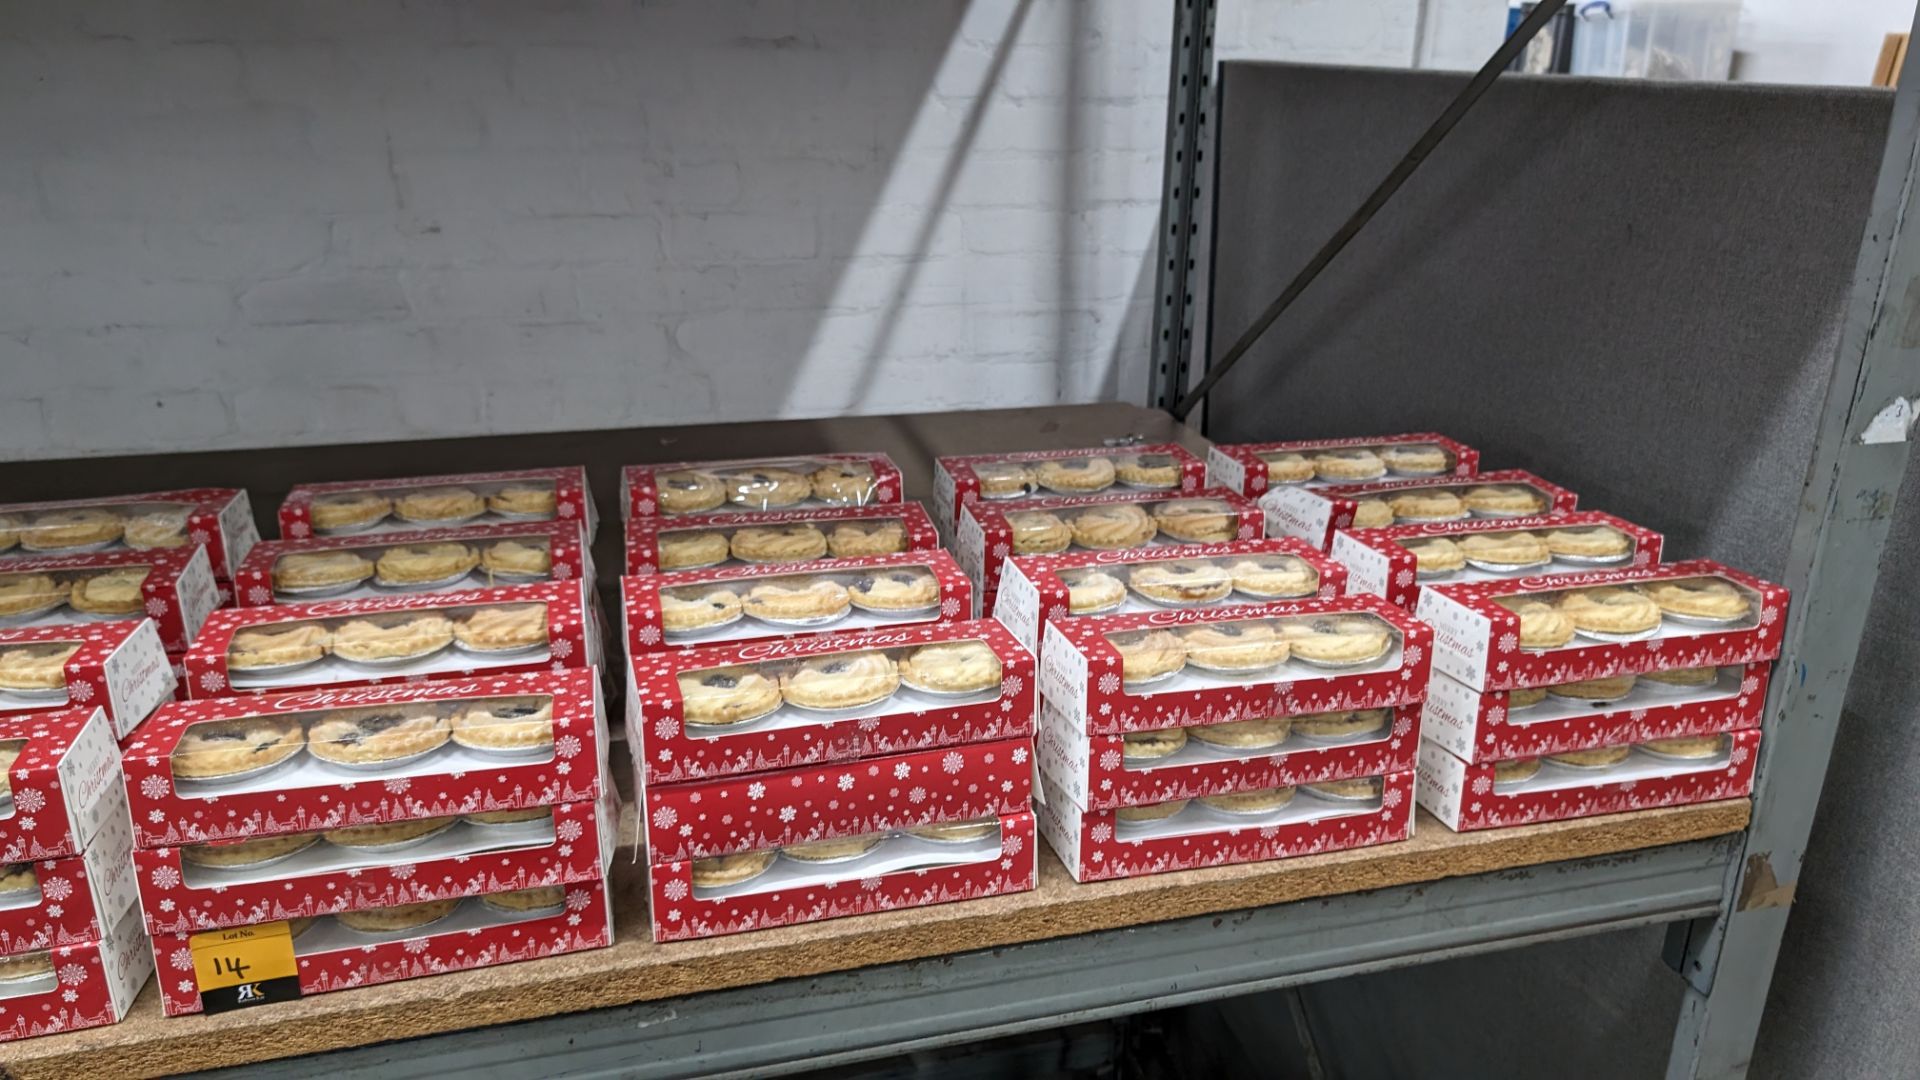 48 off 6 packs of Christmas mince pies. Each pack contains 6 pies on 2 layers & comes in Merry Chri - Image 2 of 5